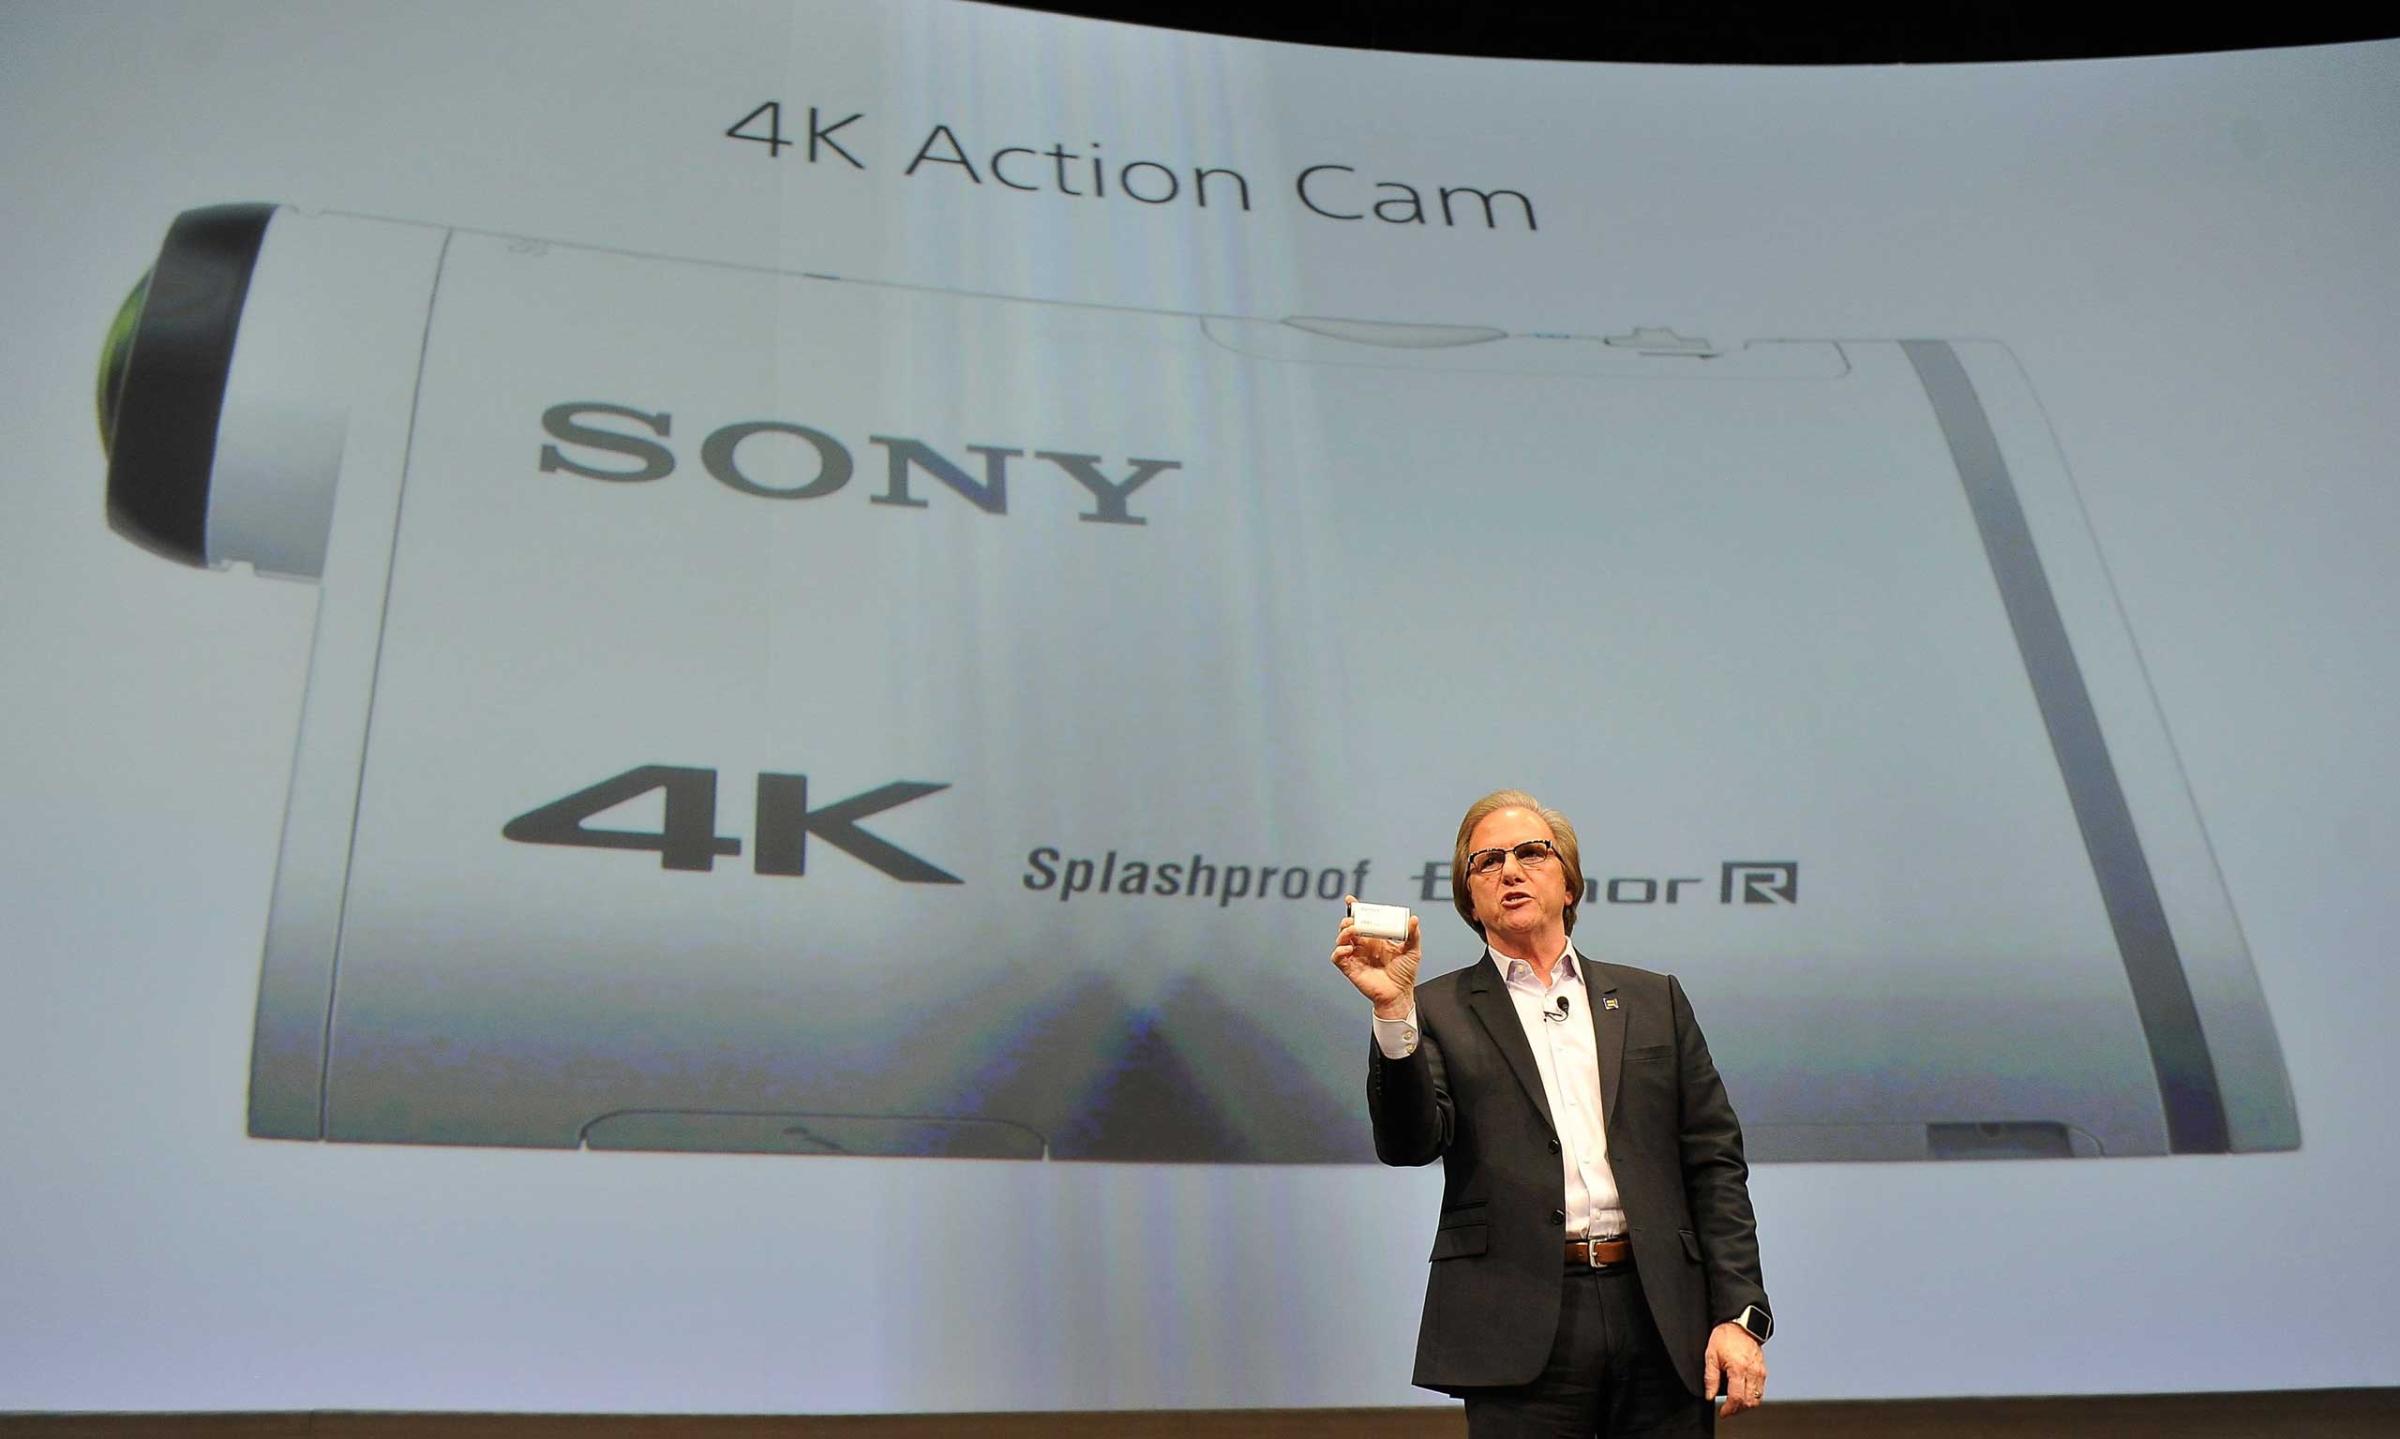 Sony Electronics President and COO Mike Fasulo displays the Sony 4K Action Cam at a press event on Jan. 5, 2015.